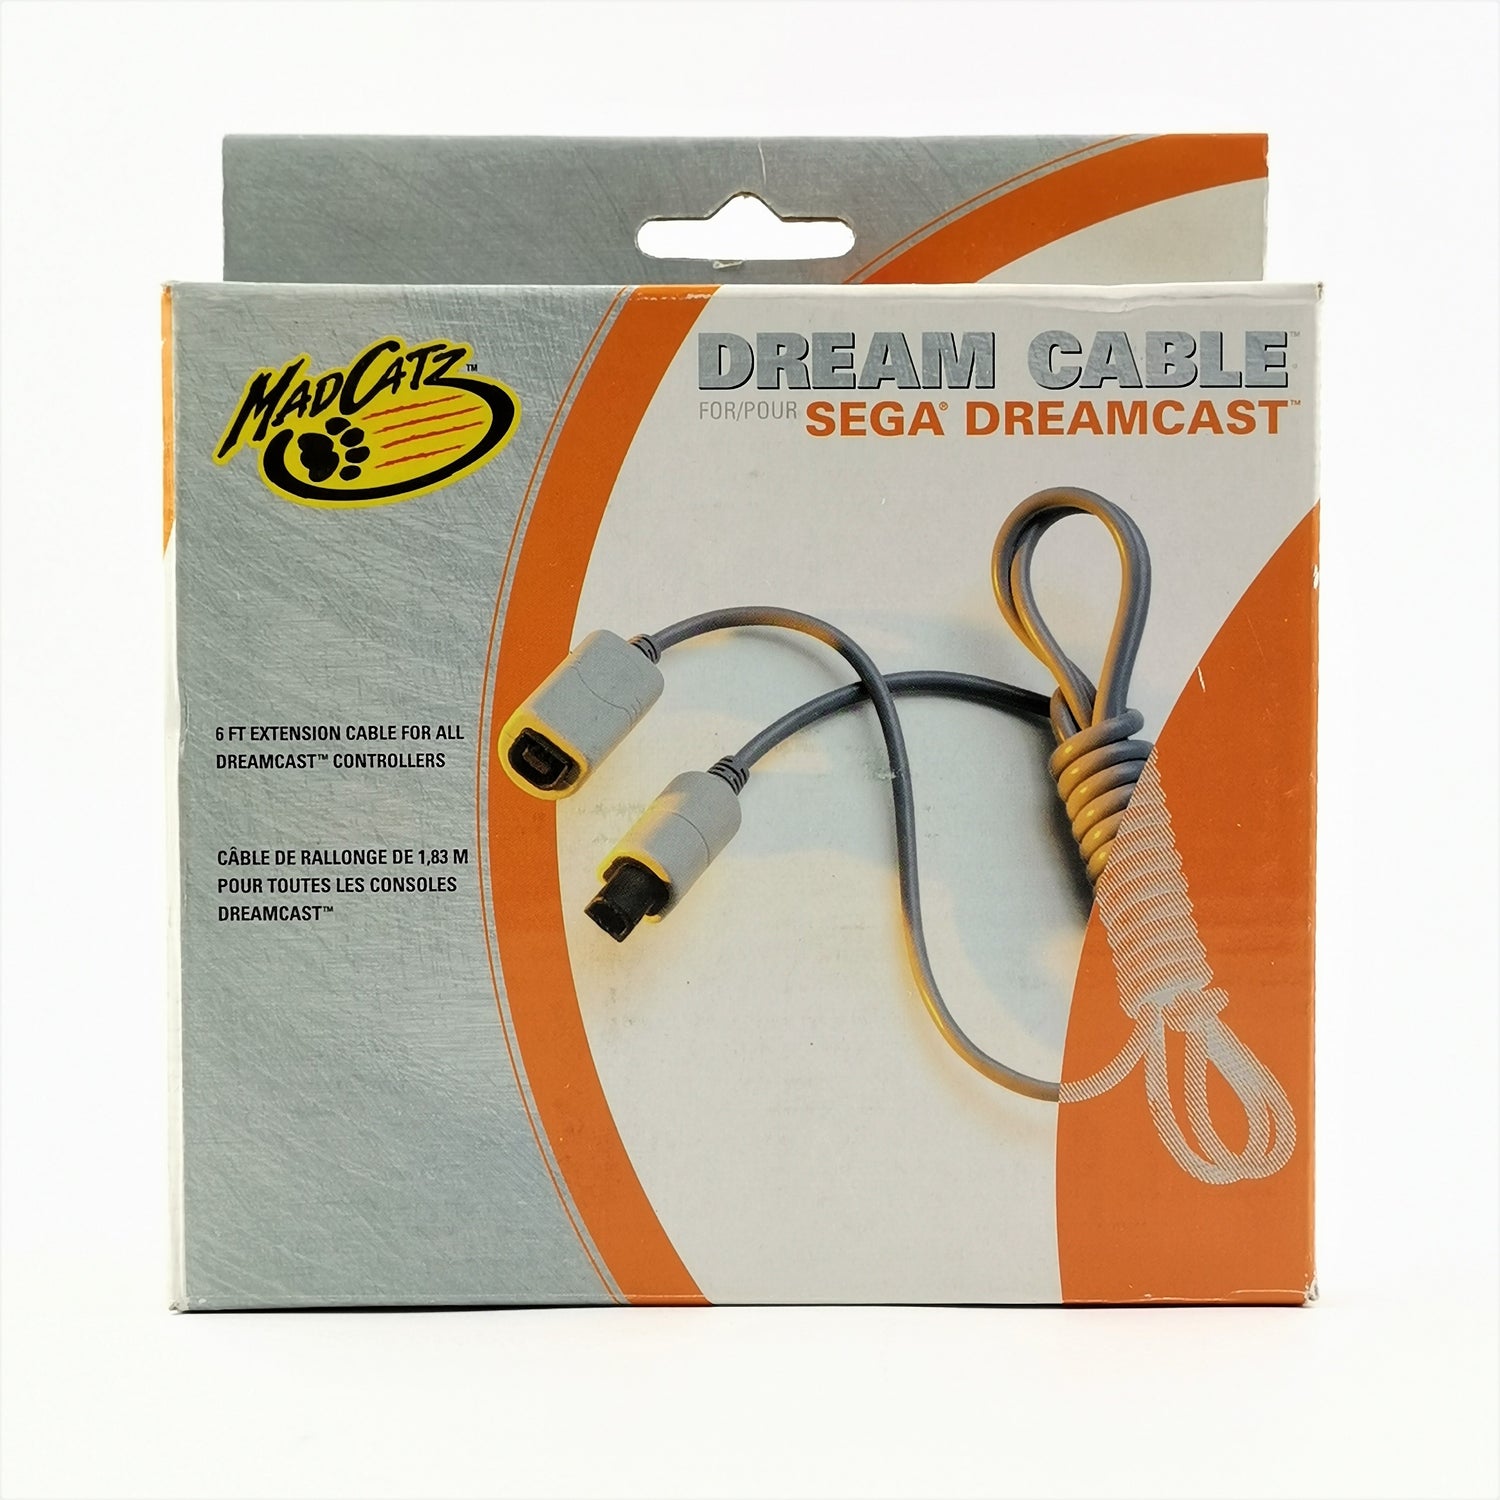 Sega Dreamcast Accessories: Dream Cable Extension NEW in original packaging - Mad Catz NEW